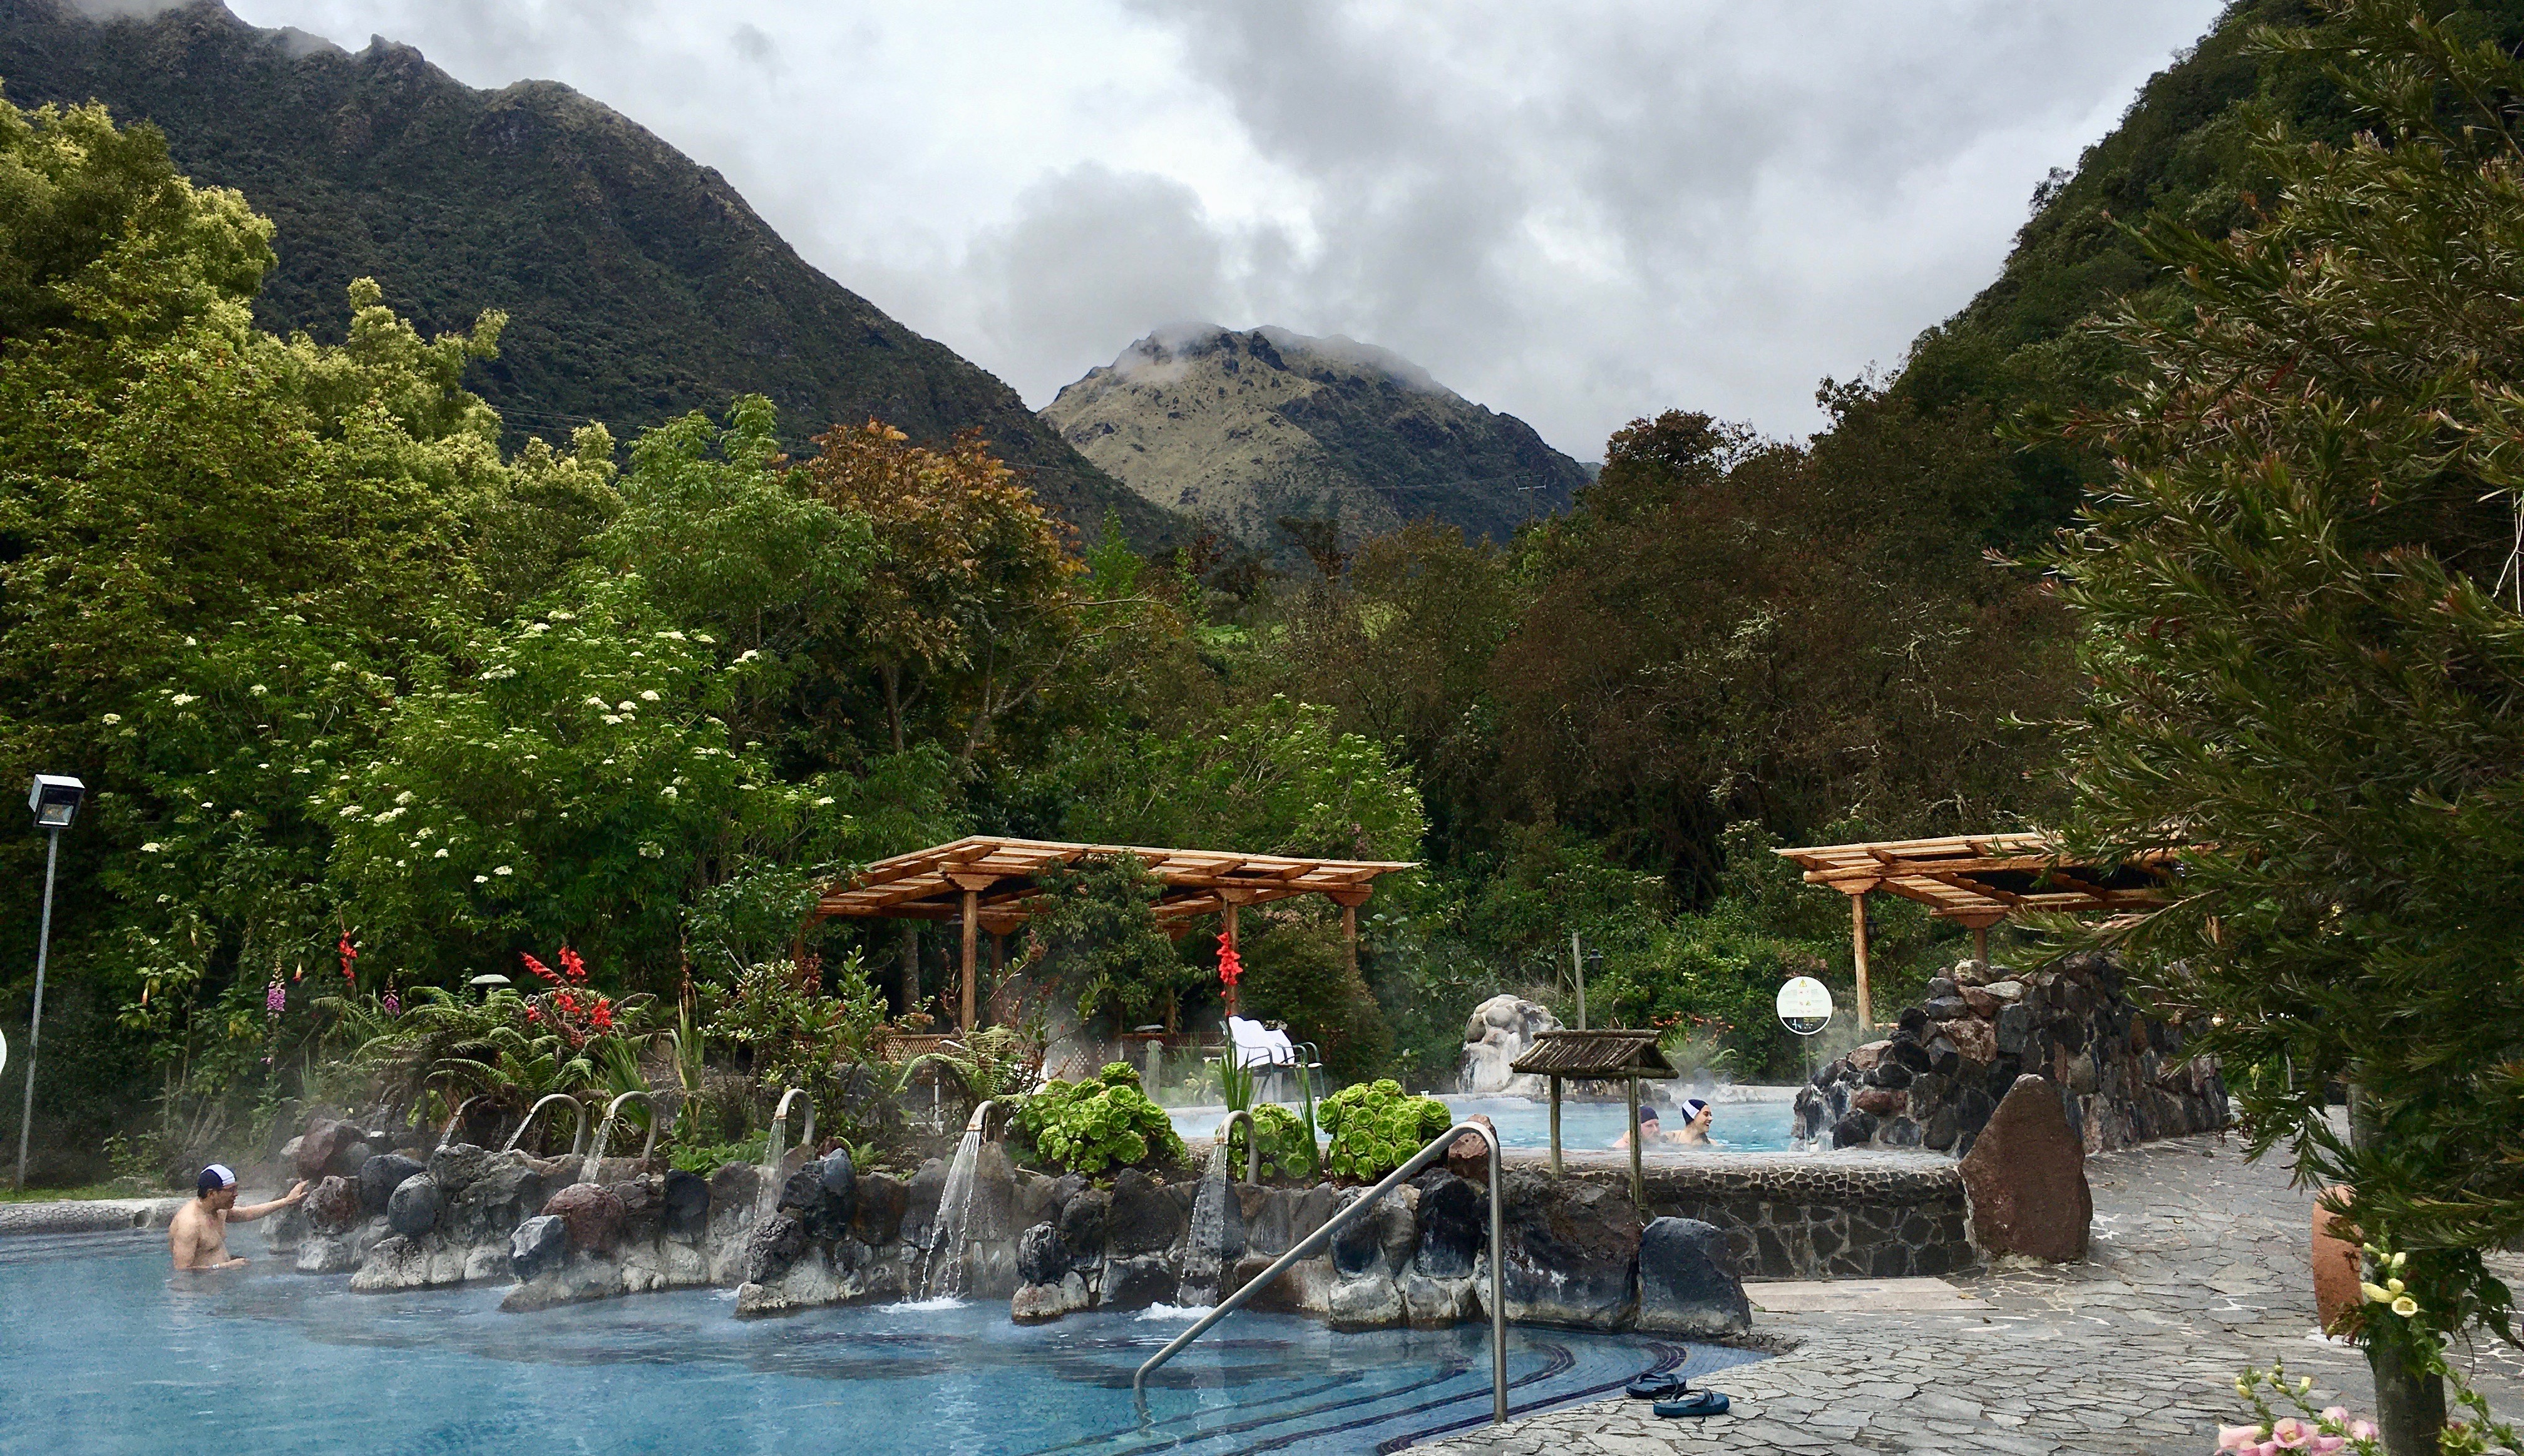 Thermal water pools in Papallacta, Ecuador with people bathing, surrounded by green vegetation, red flowers and high mountains